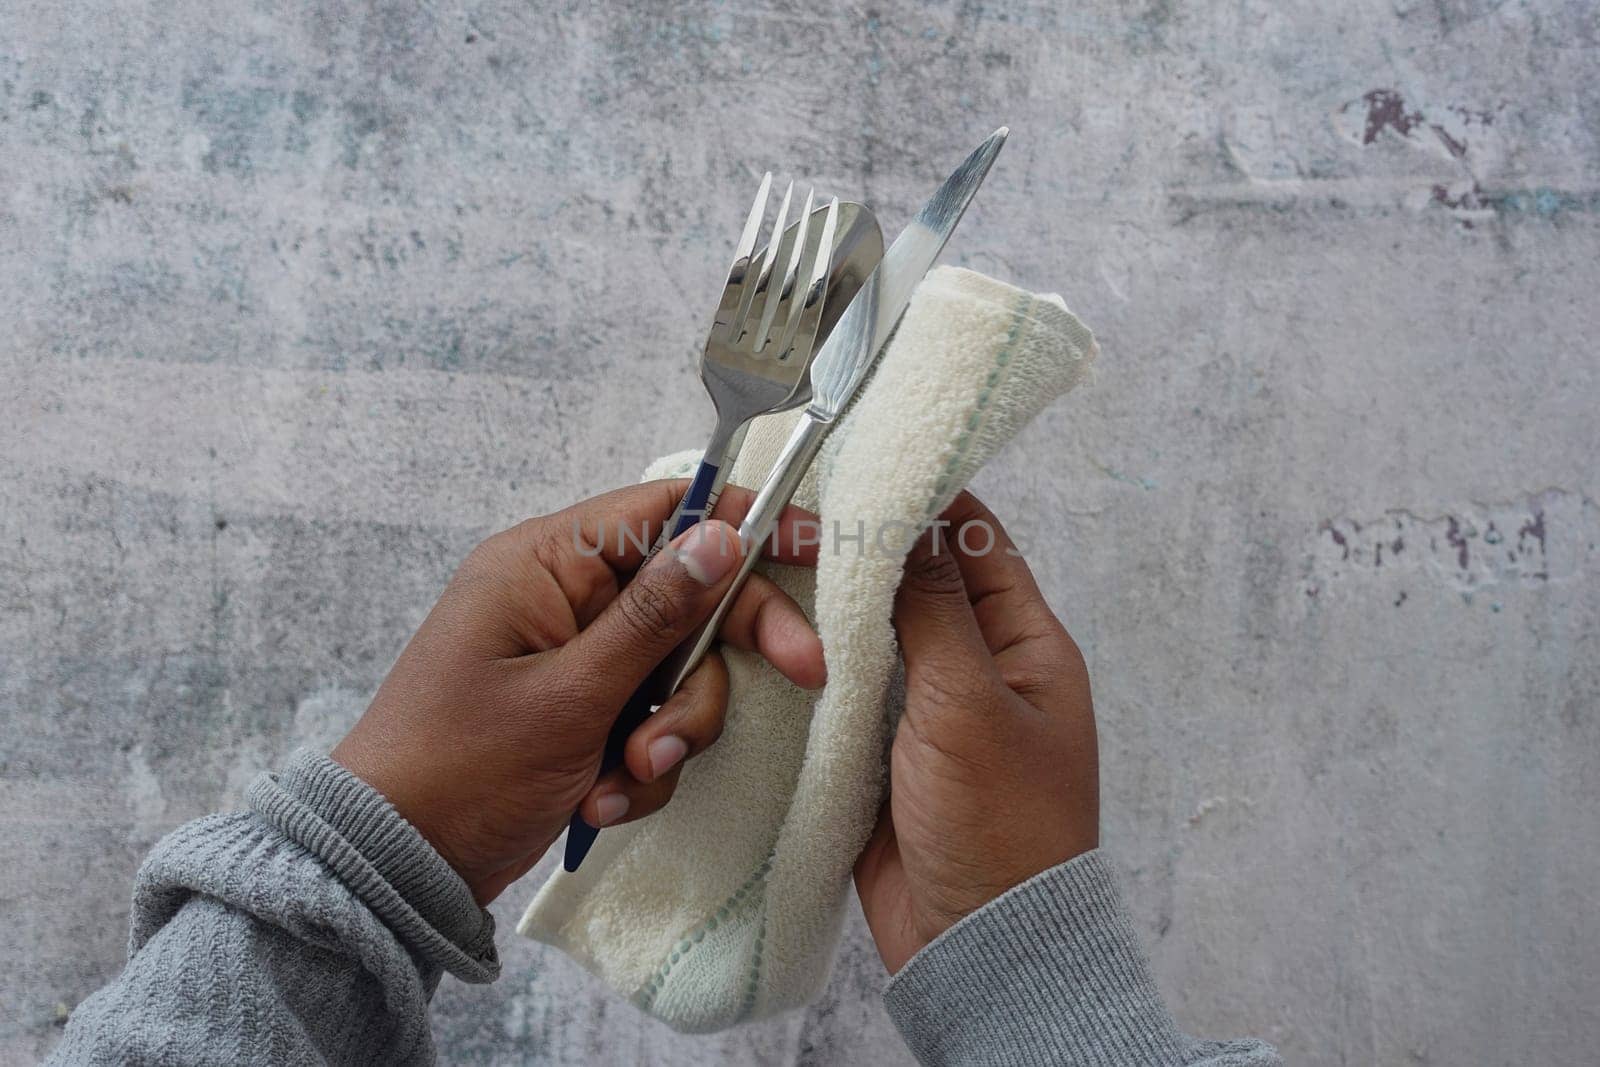 person hand cleaning and drying cutlery with a towel,